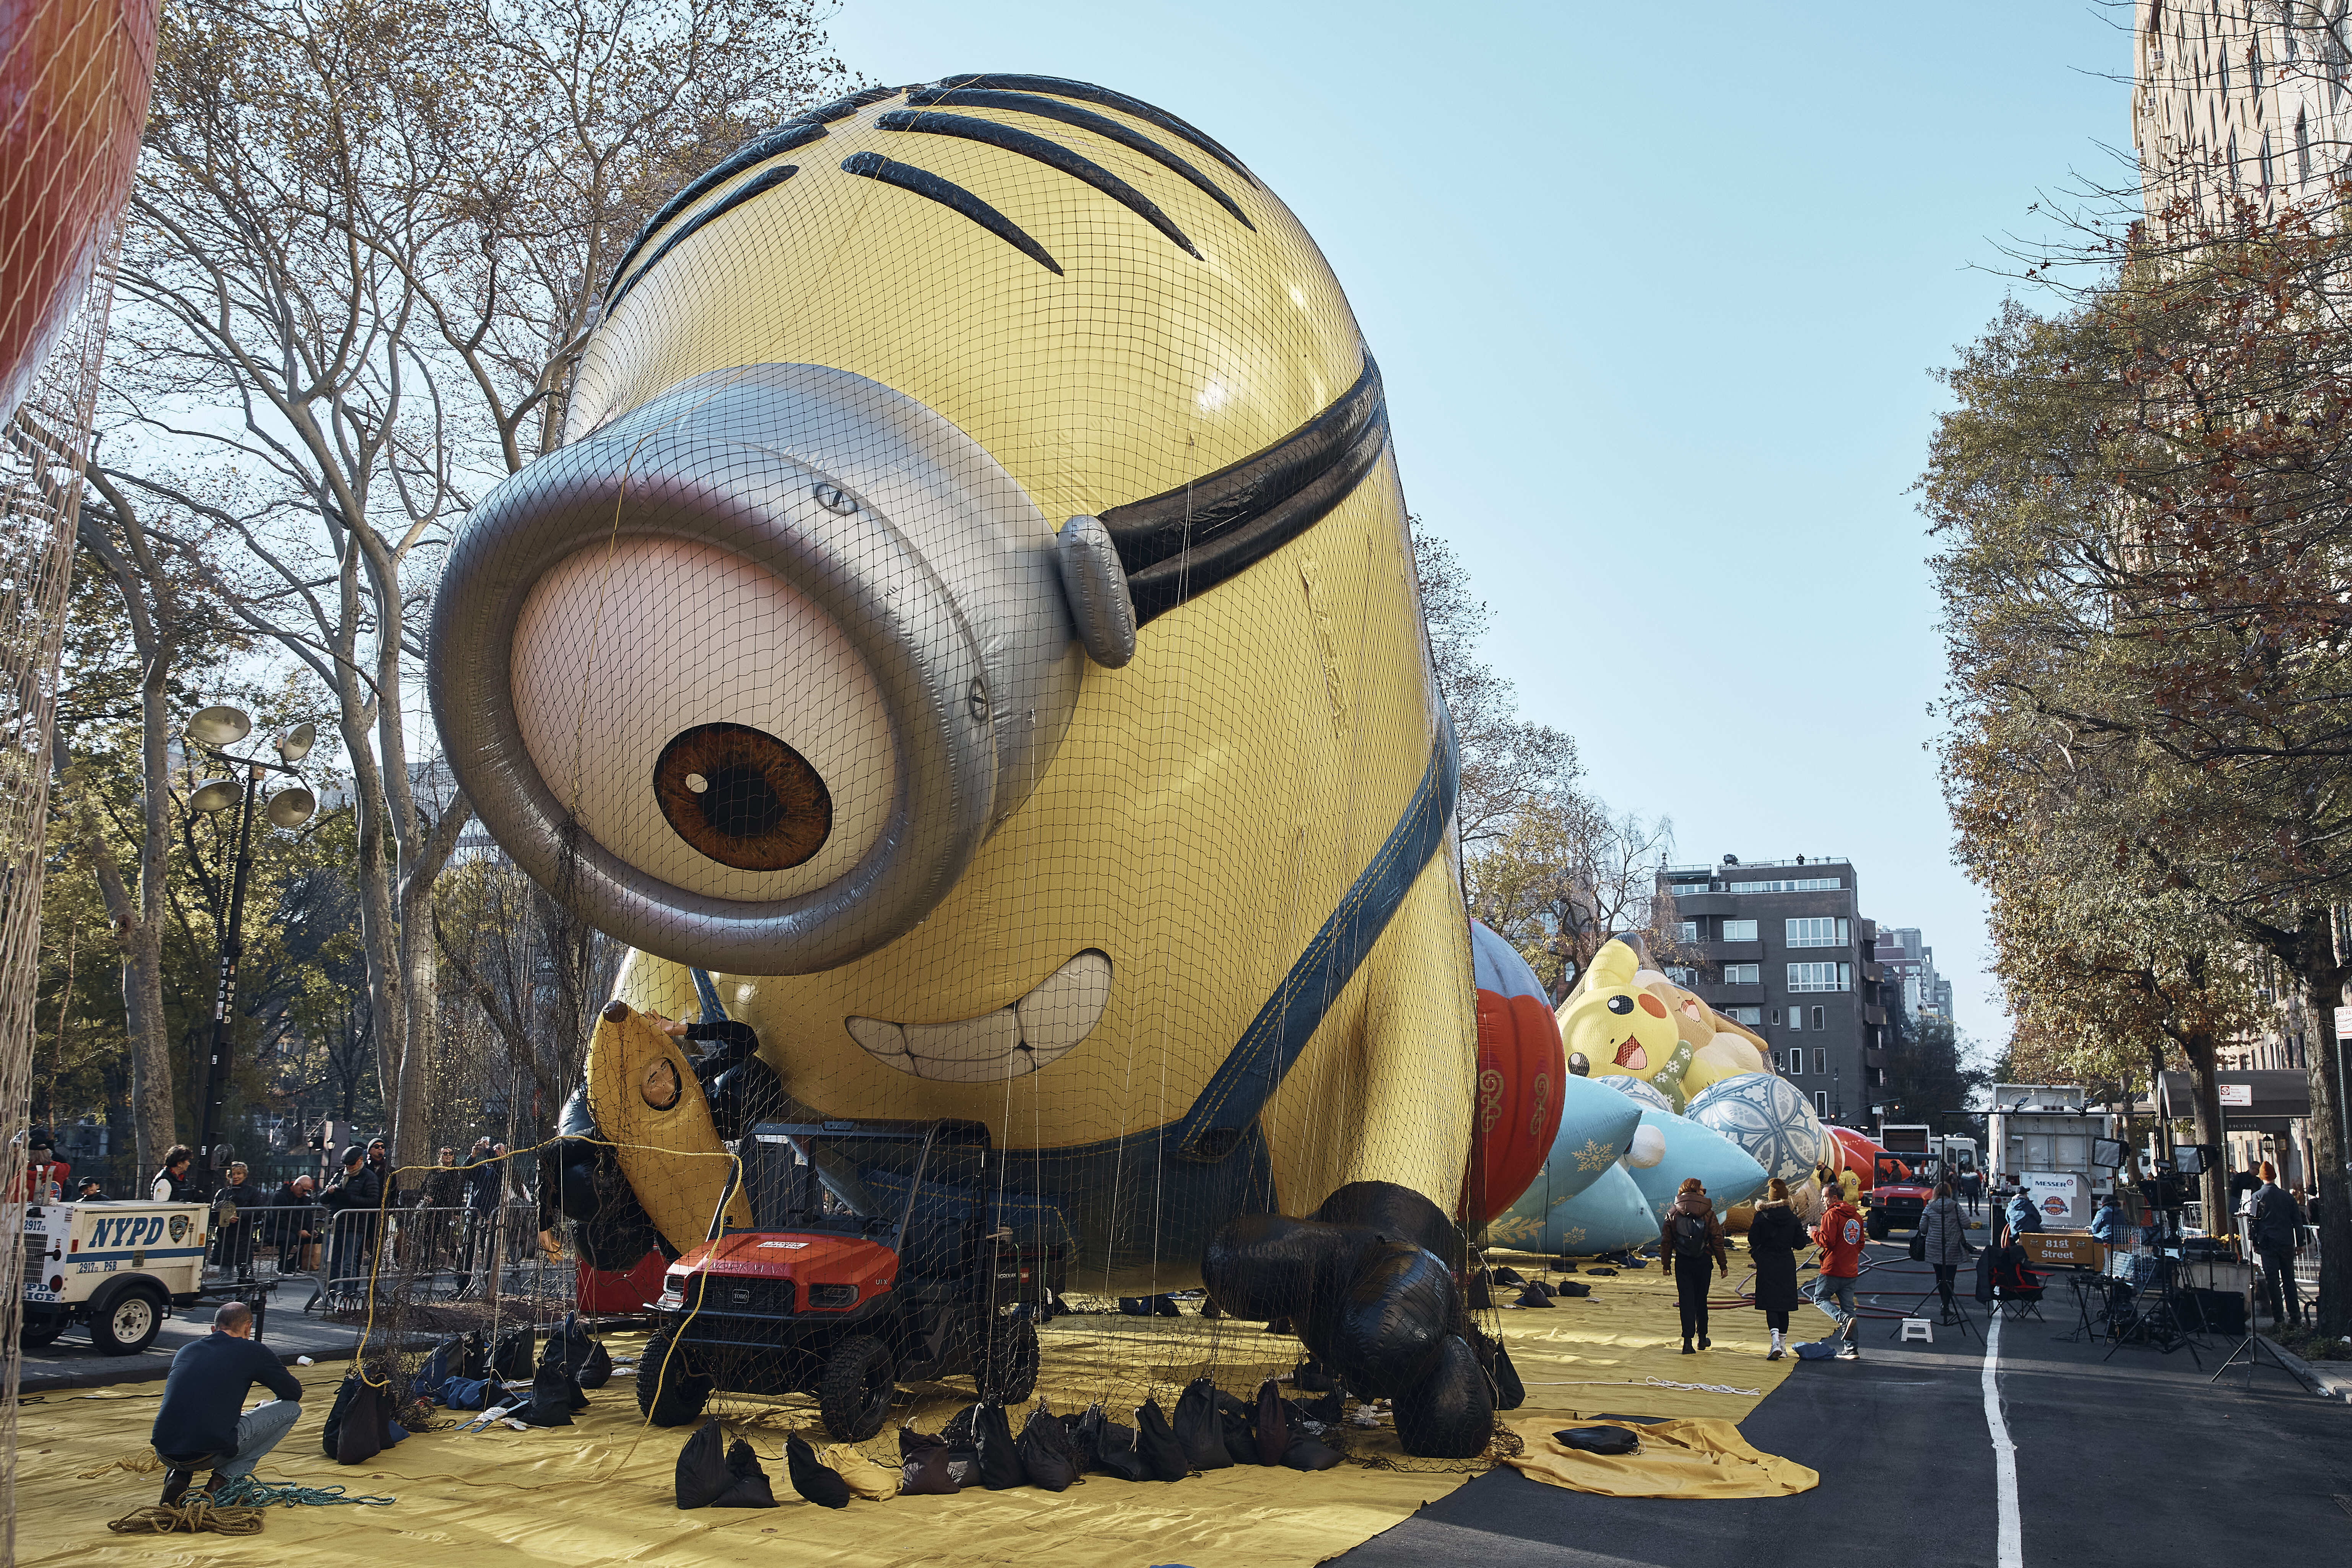 How to watch Macy's Thanksgiving Day Parade 